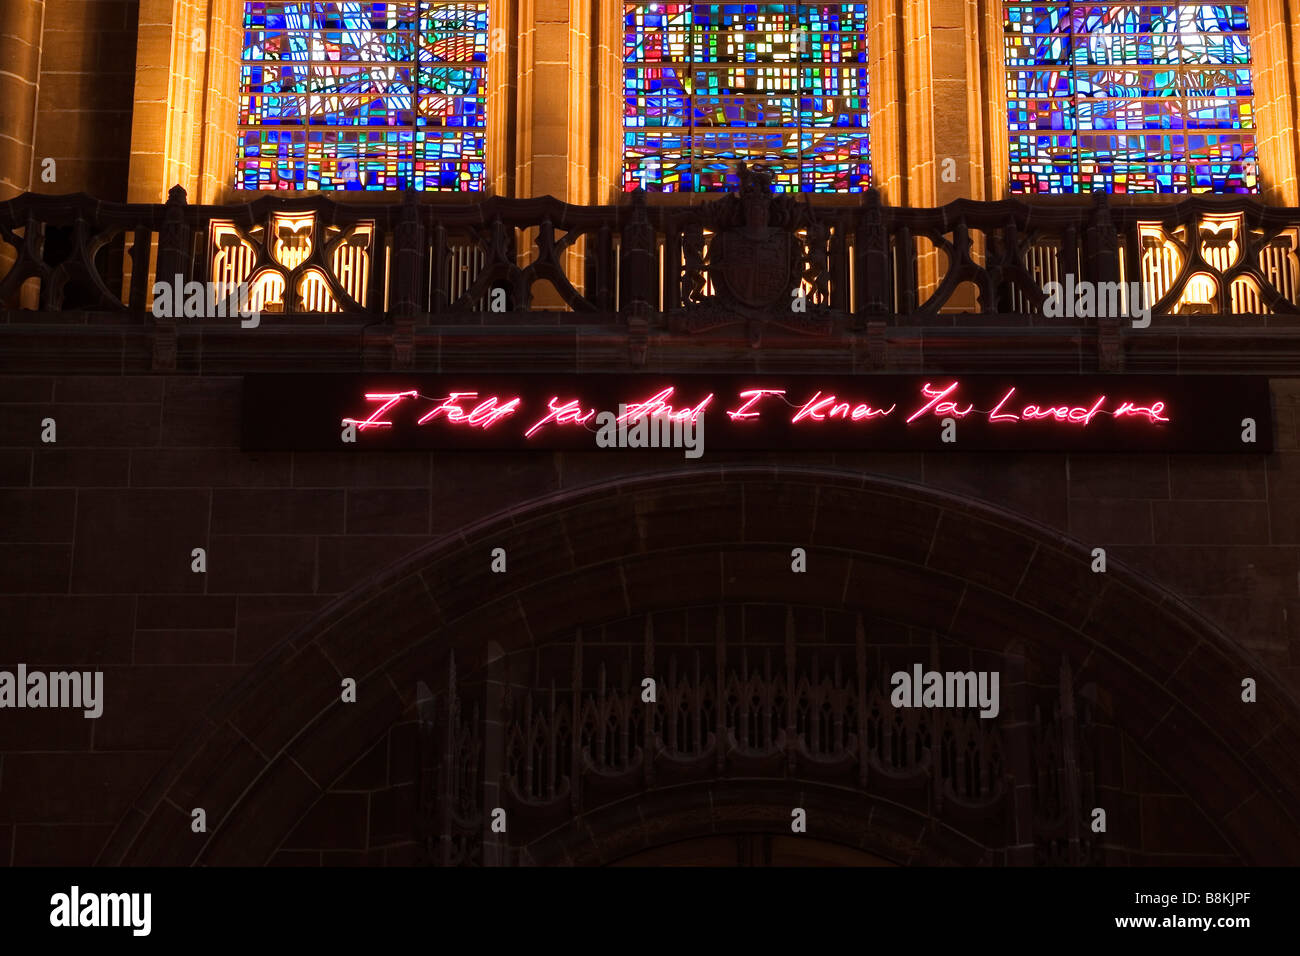 A neon sign inside Liverpool cathedral Stock Photo